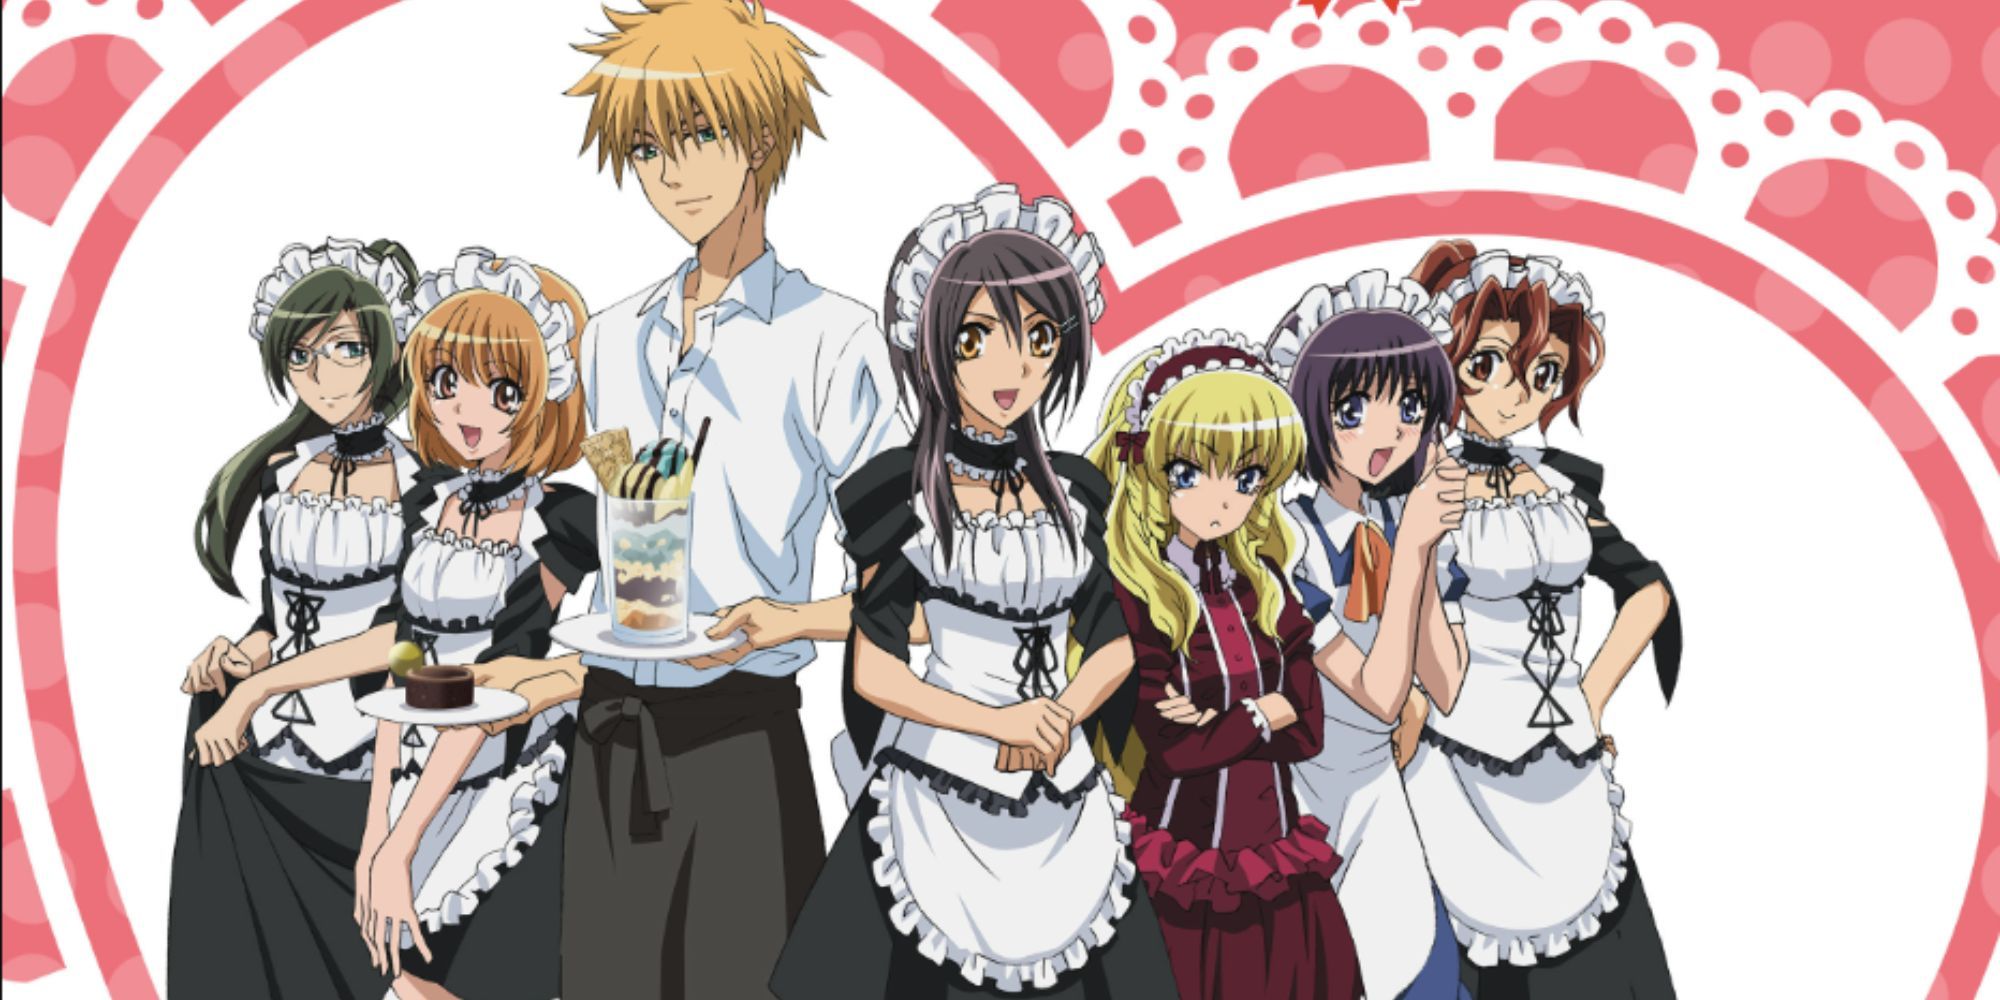 five maids stand with a tall blonde haired boy and a short loli girl